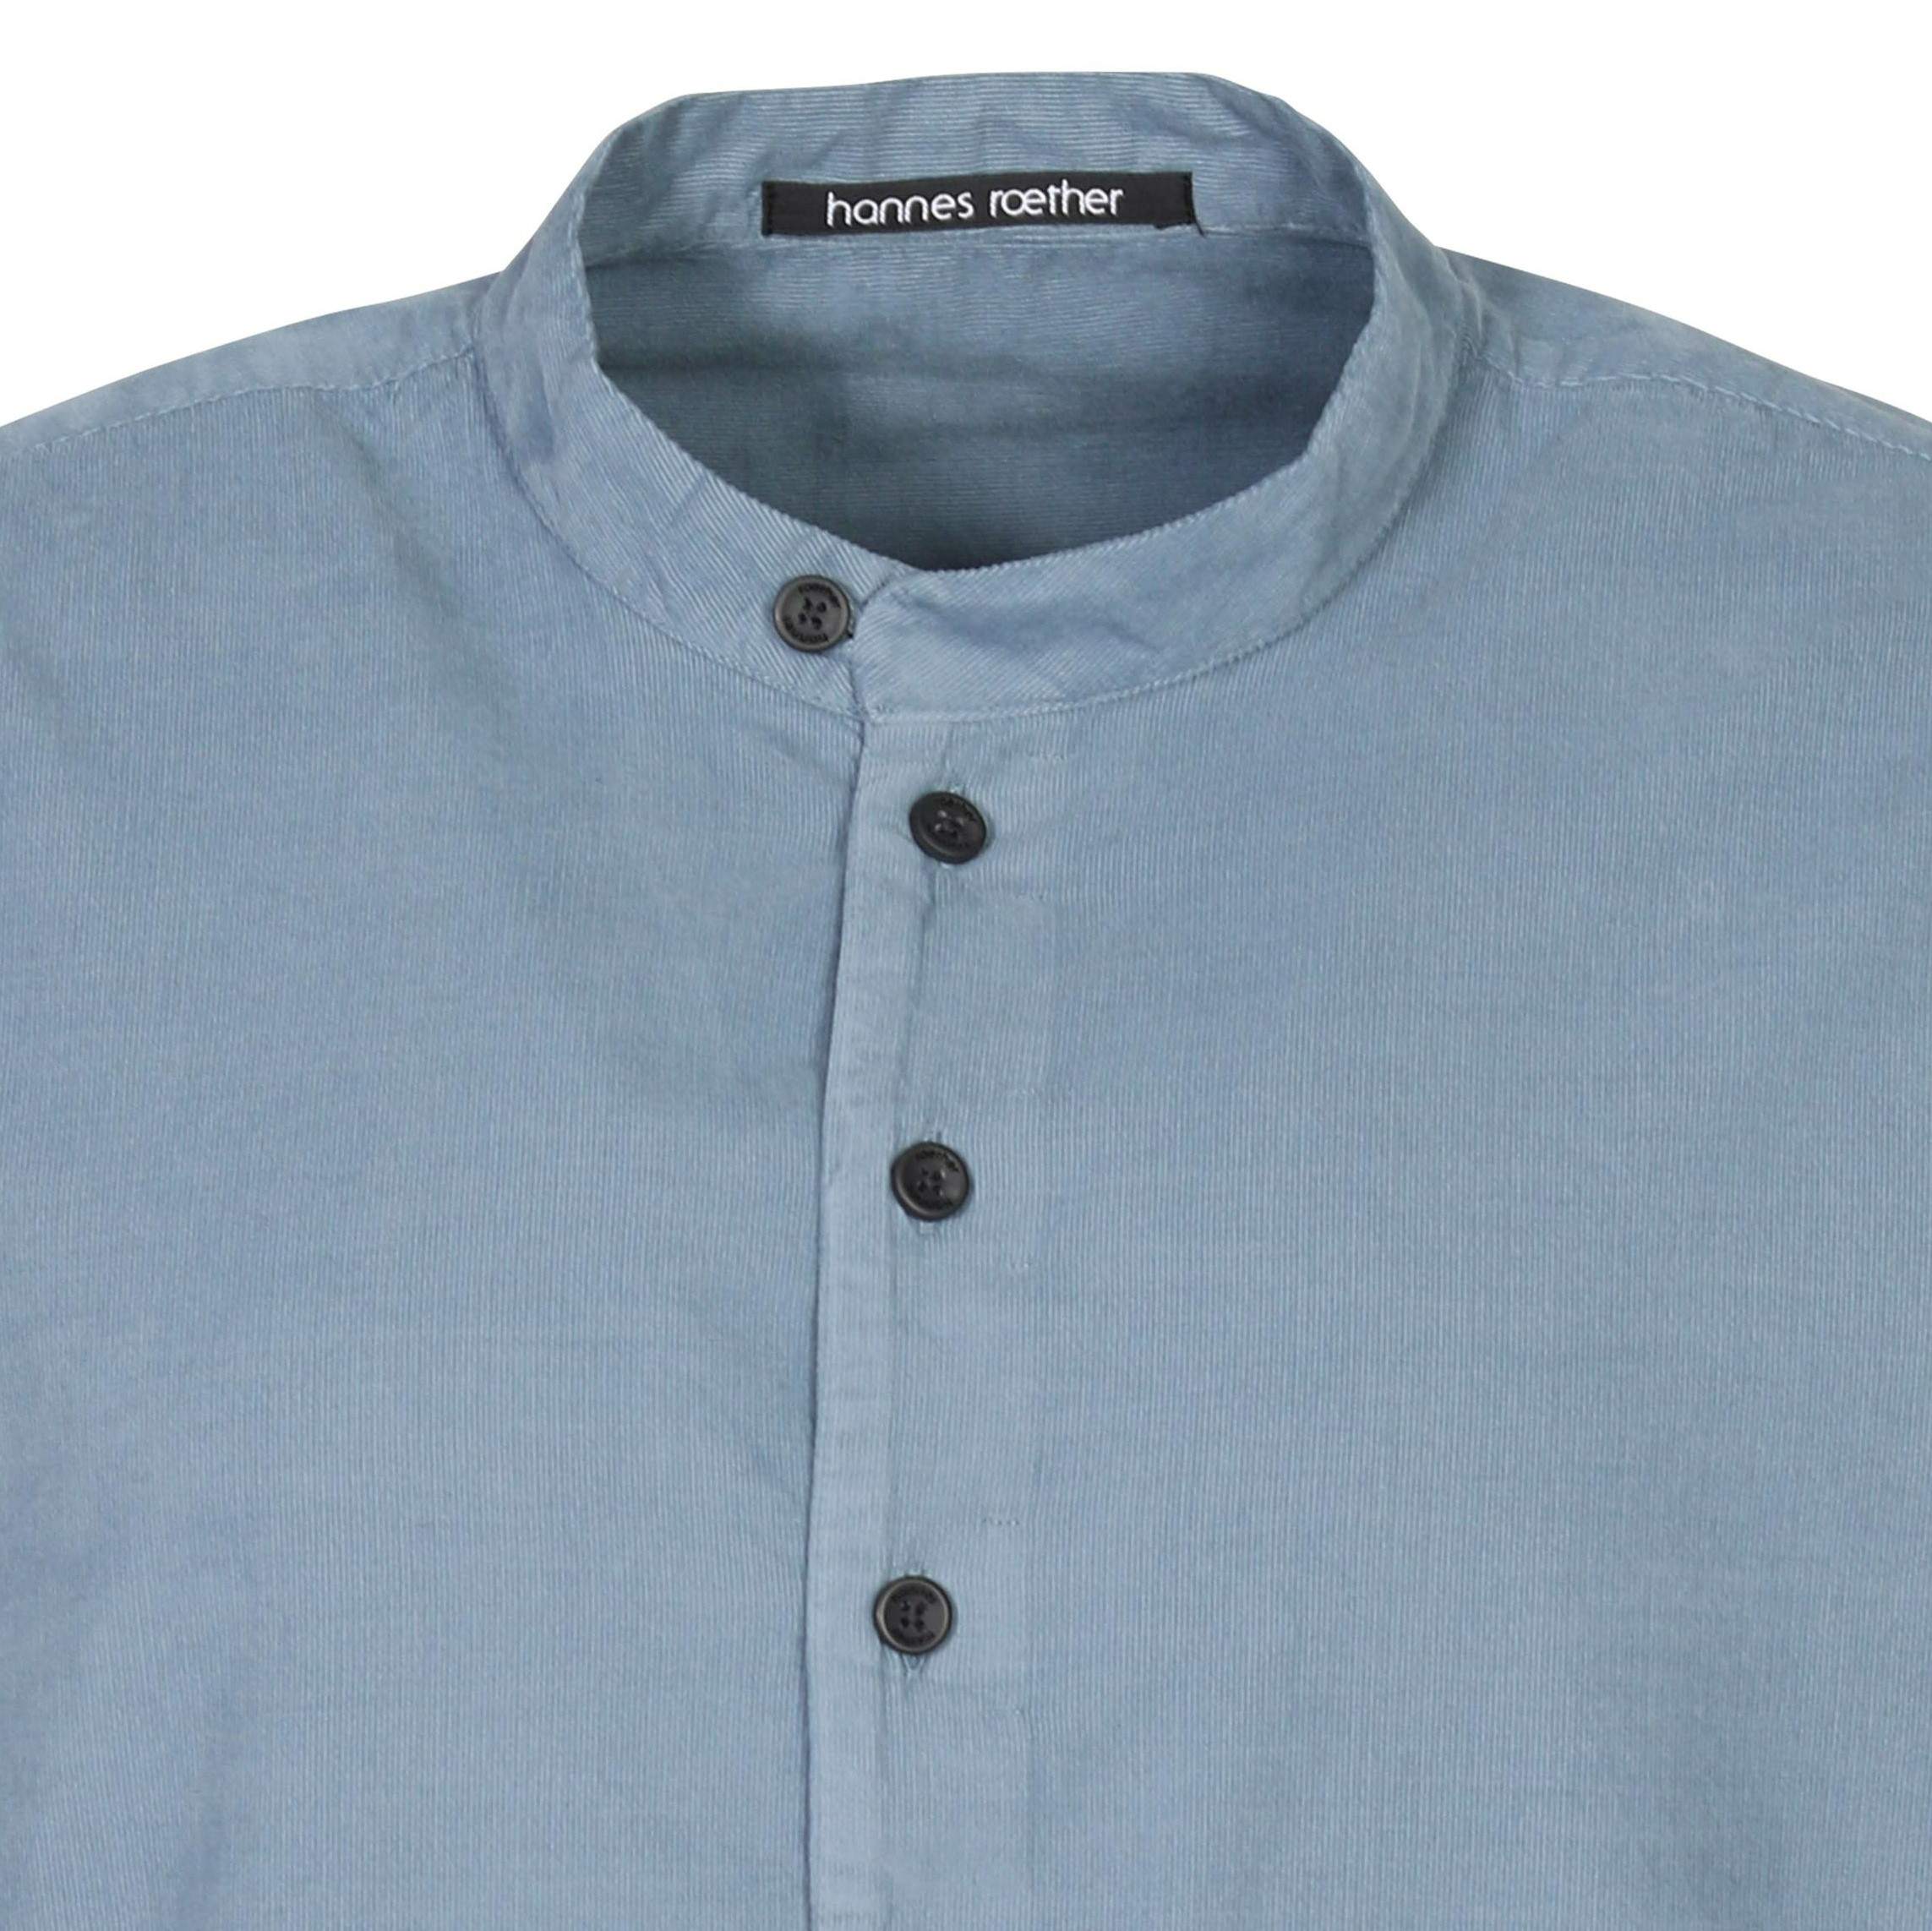 Hannes Roether Corduroy Shirt in Mirage